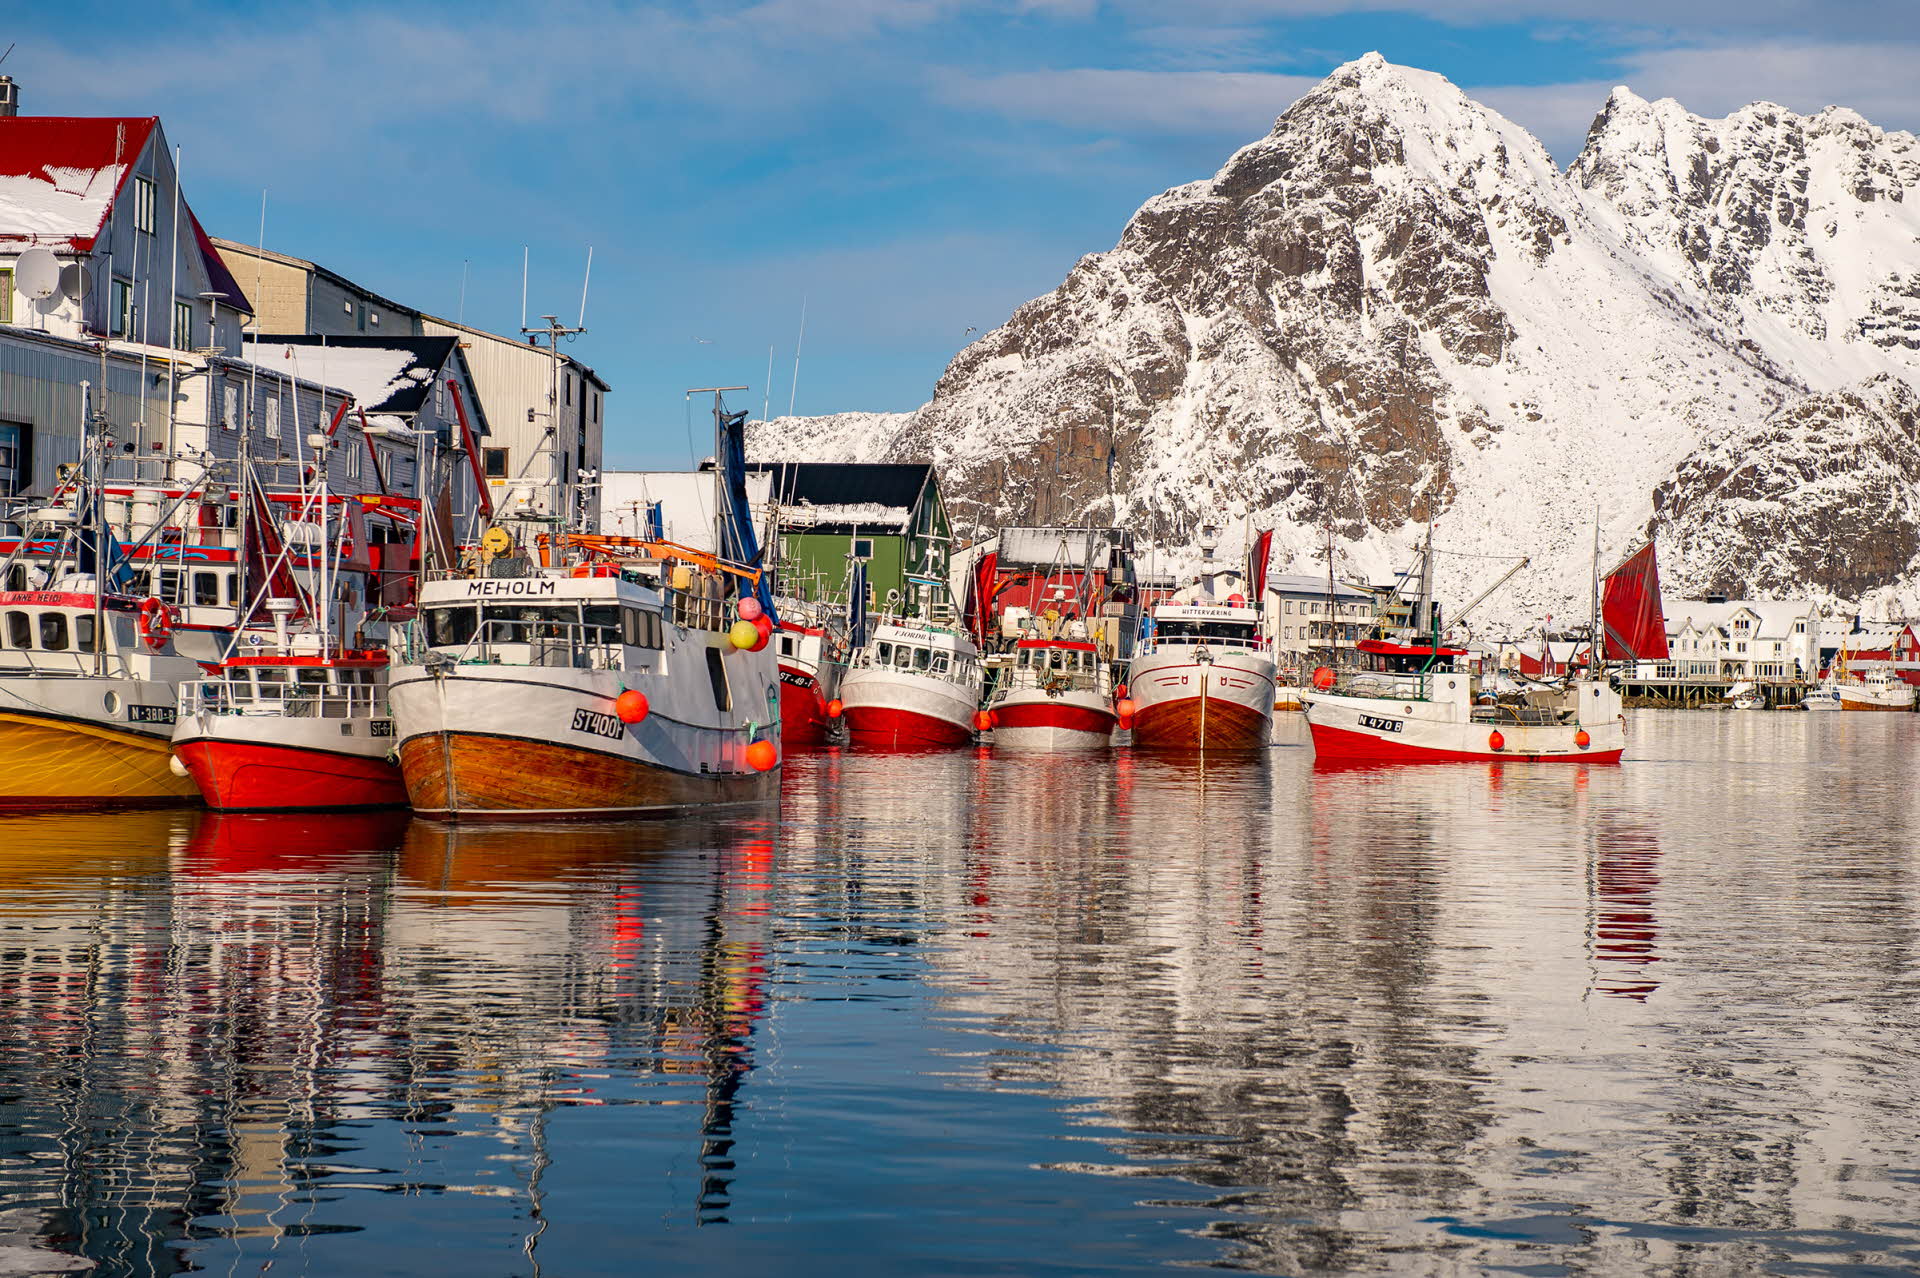 Fishing boats docked at a quay in a village in the Lofoten Islands. Snowy mountains in the background.